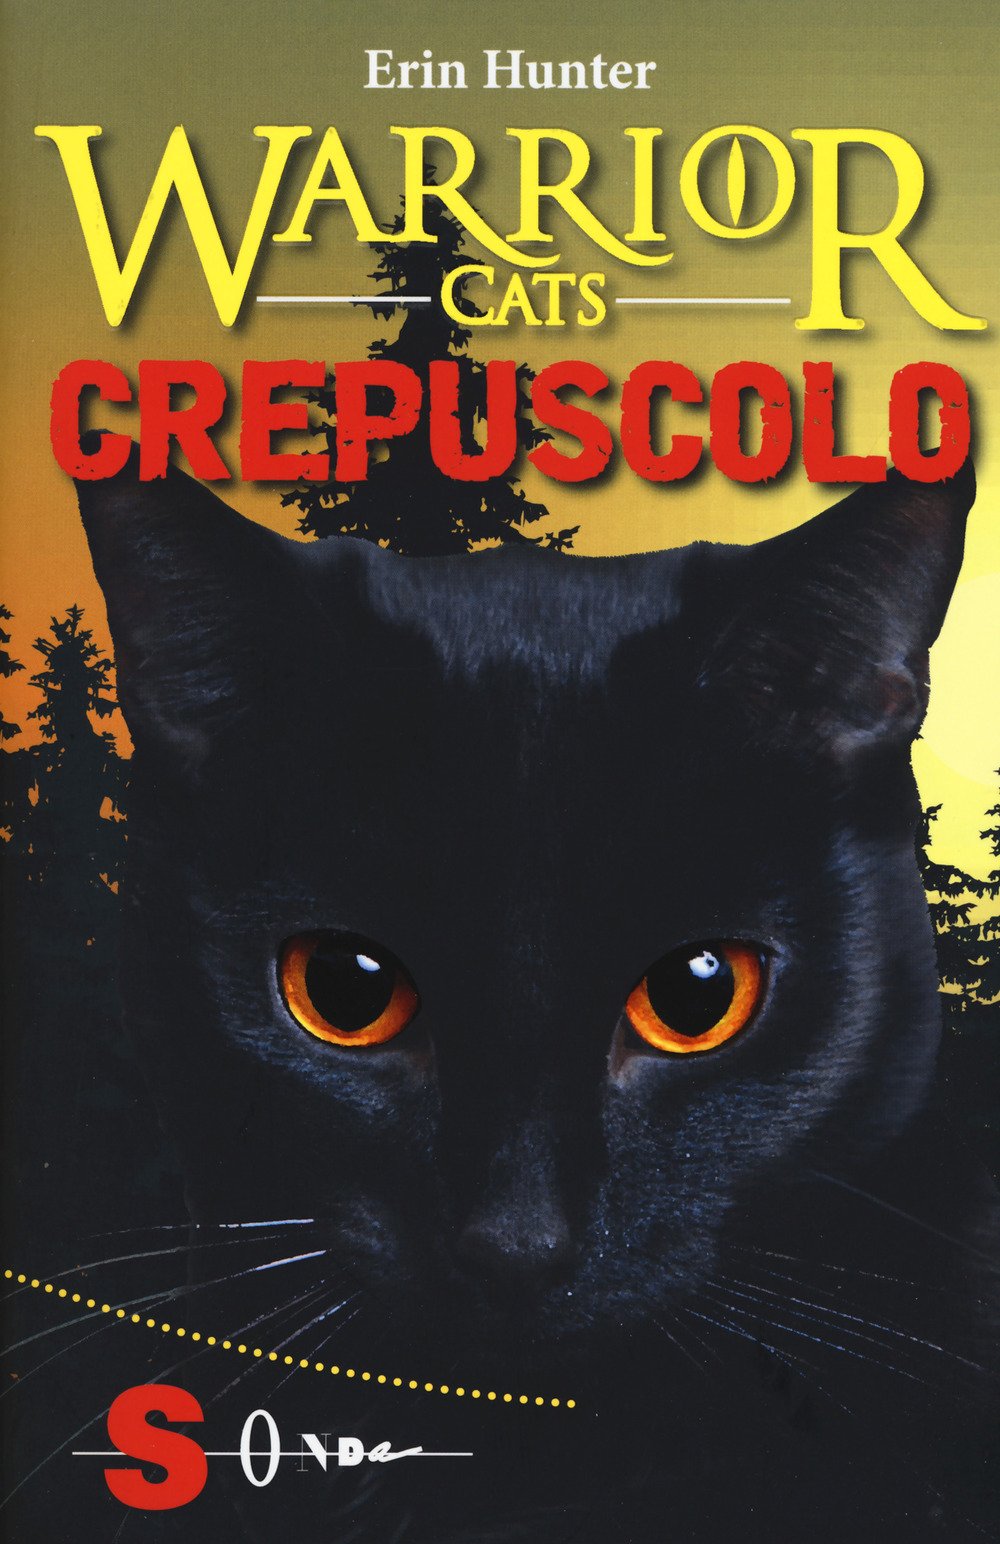 Warrior cats. Crepuscolo)